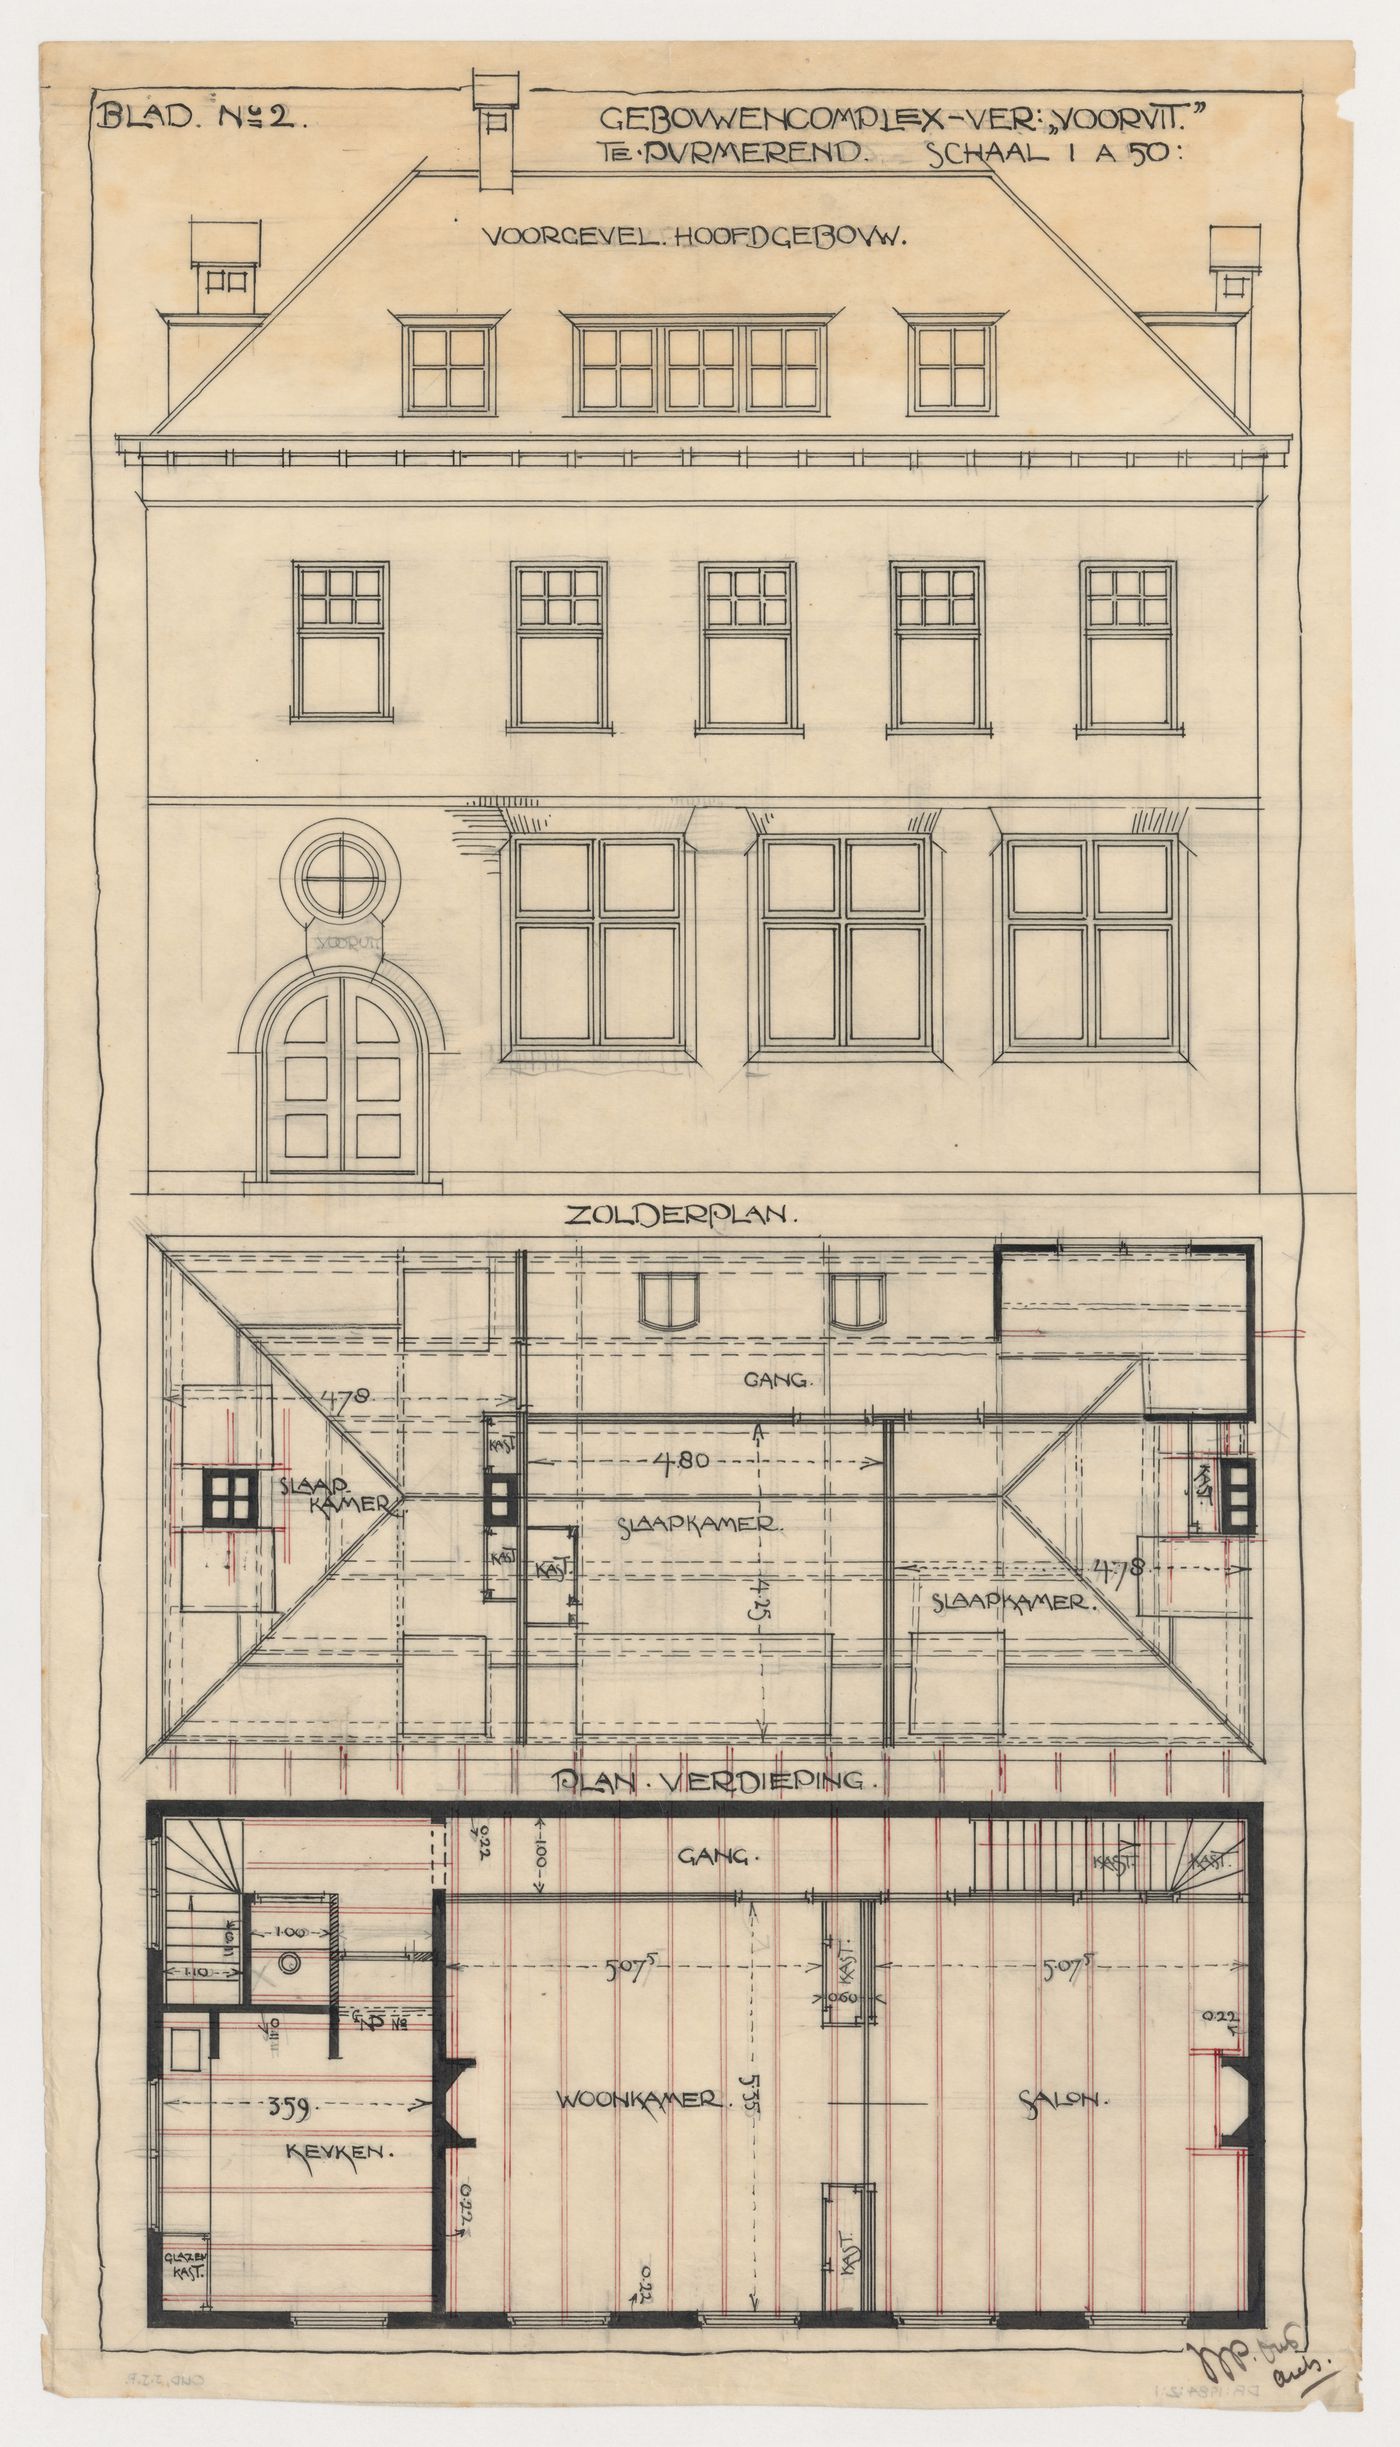 Principal elevation and second floor and attic plans for Vooruit Cooperative meeting hall, Purmerend, Netherlands